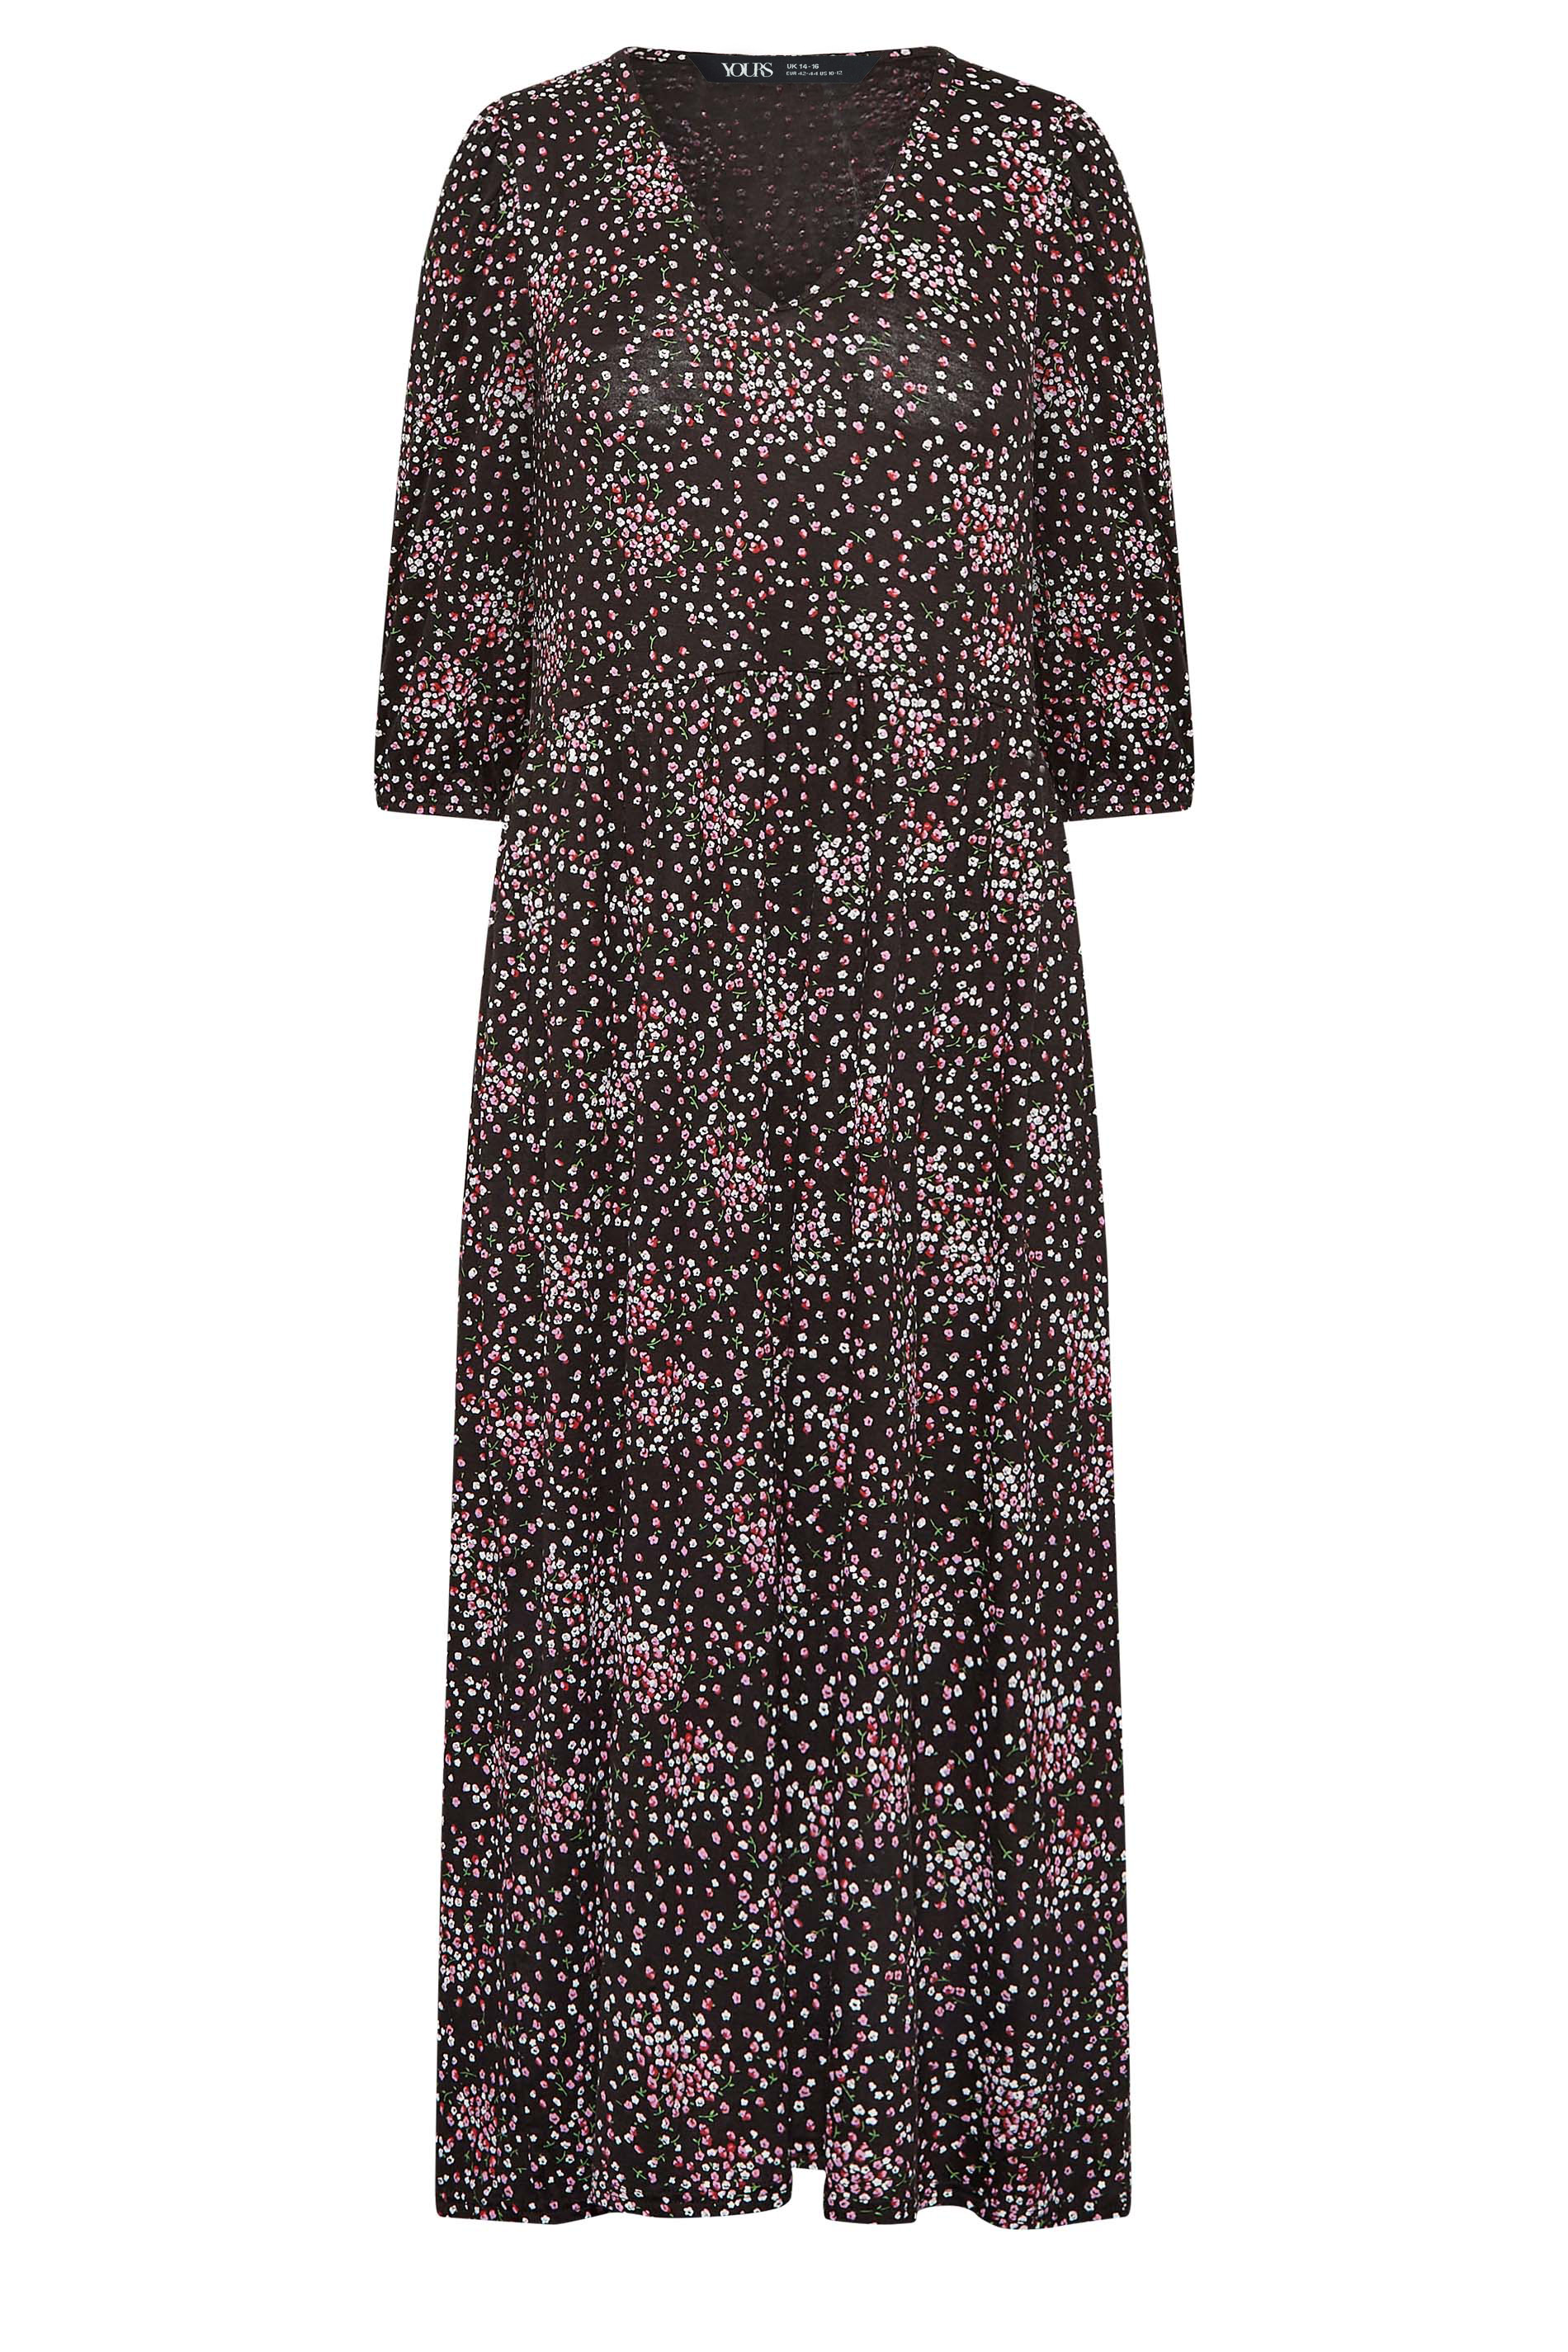 YOURS PETITE Plus Size Black & Pink Ditsy Print Midaxi Dress | Yours Clothing 1